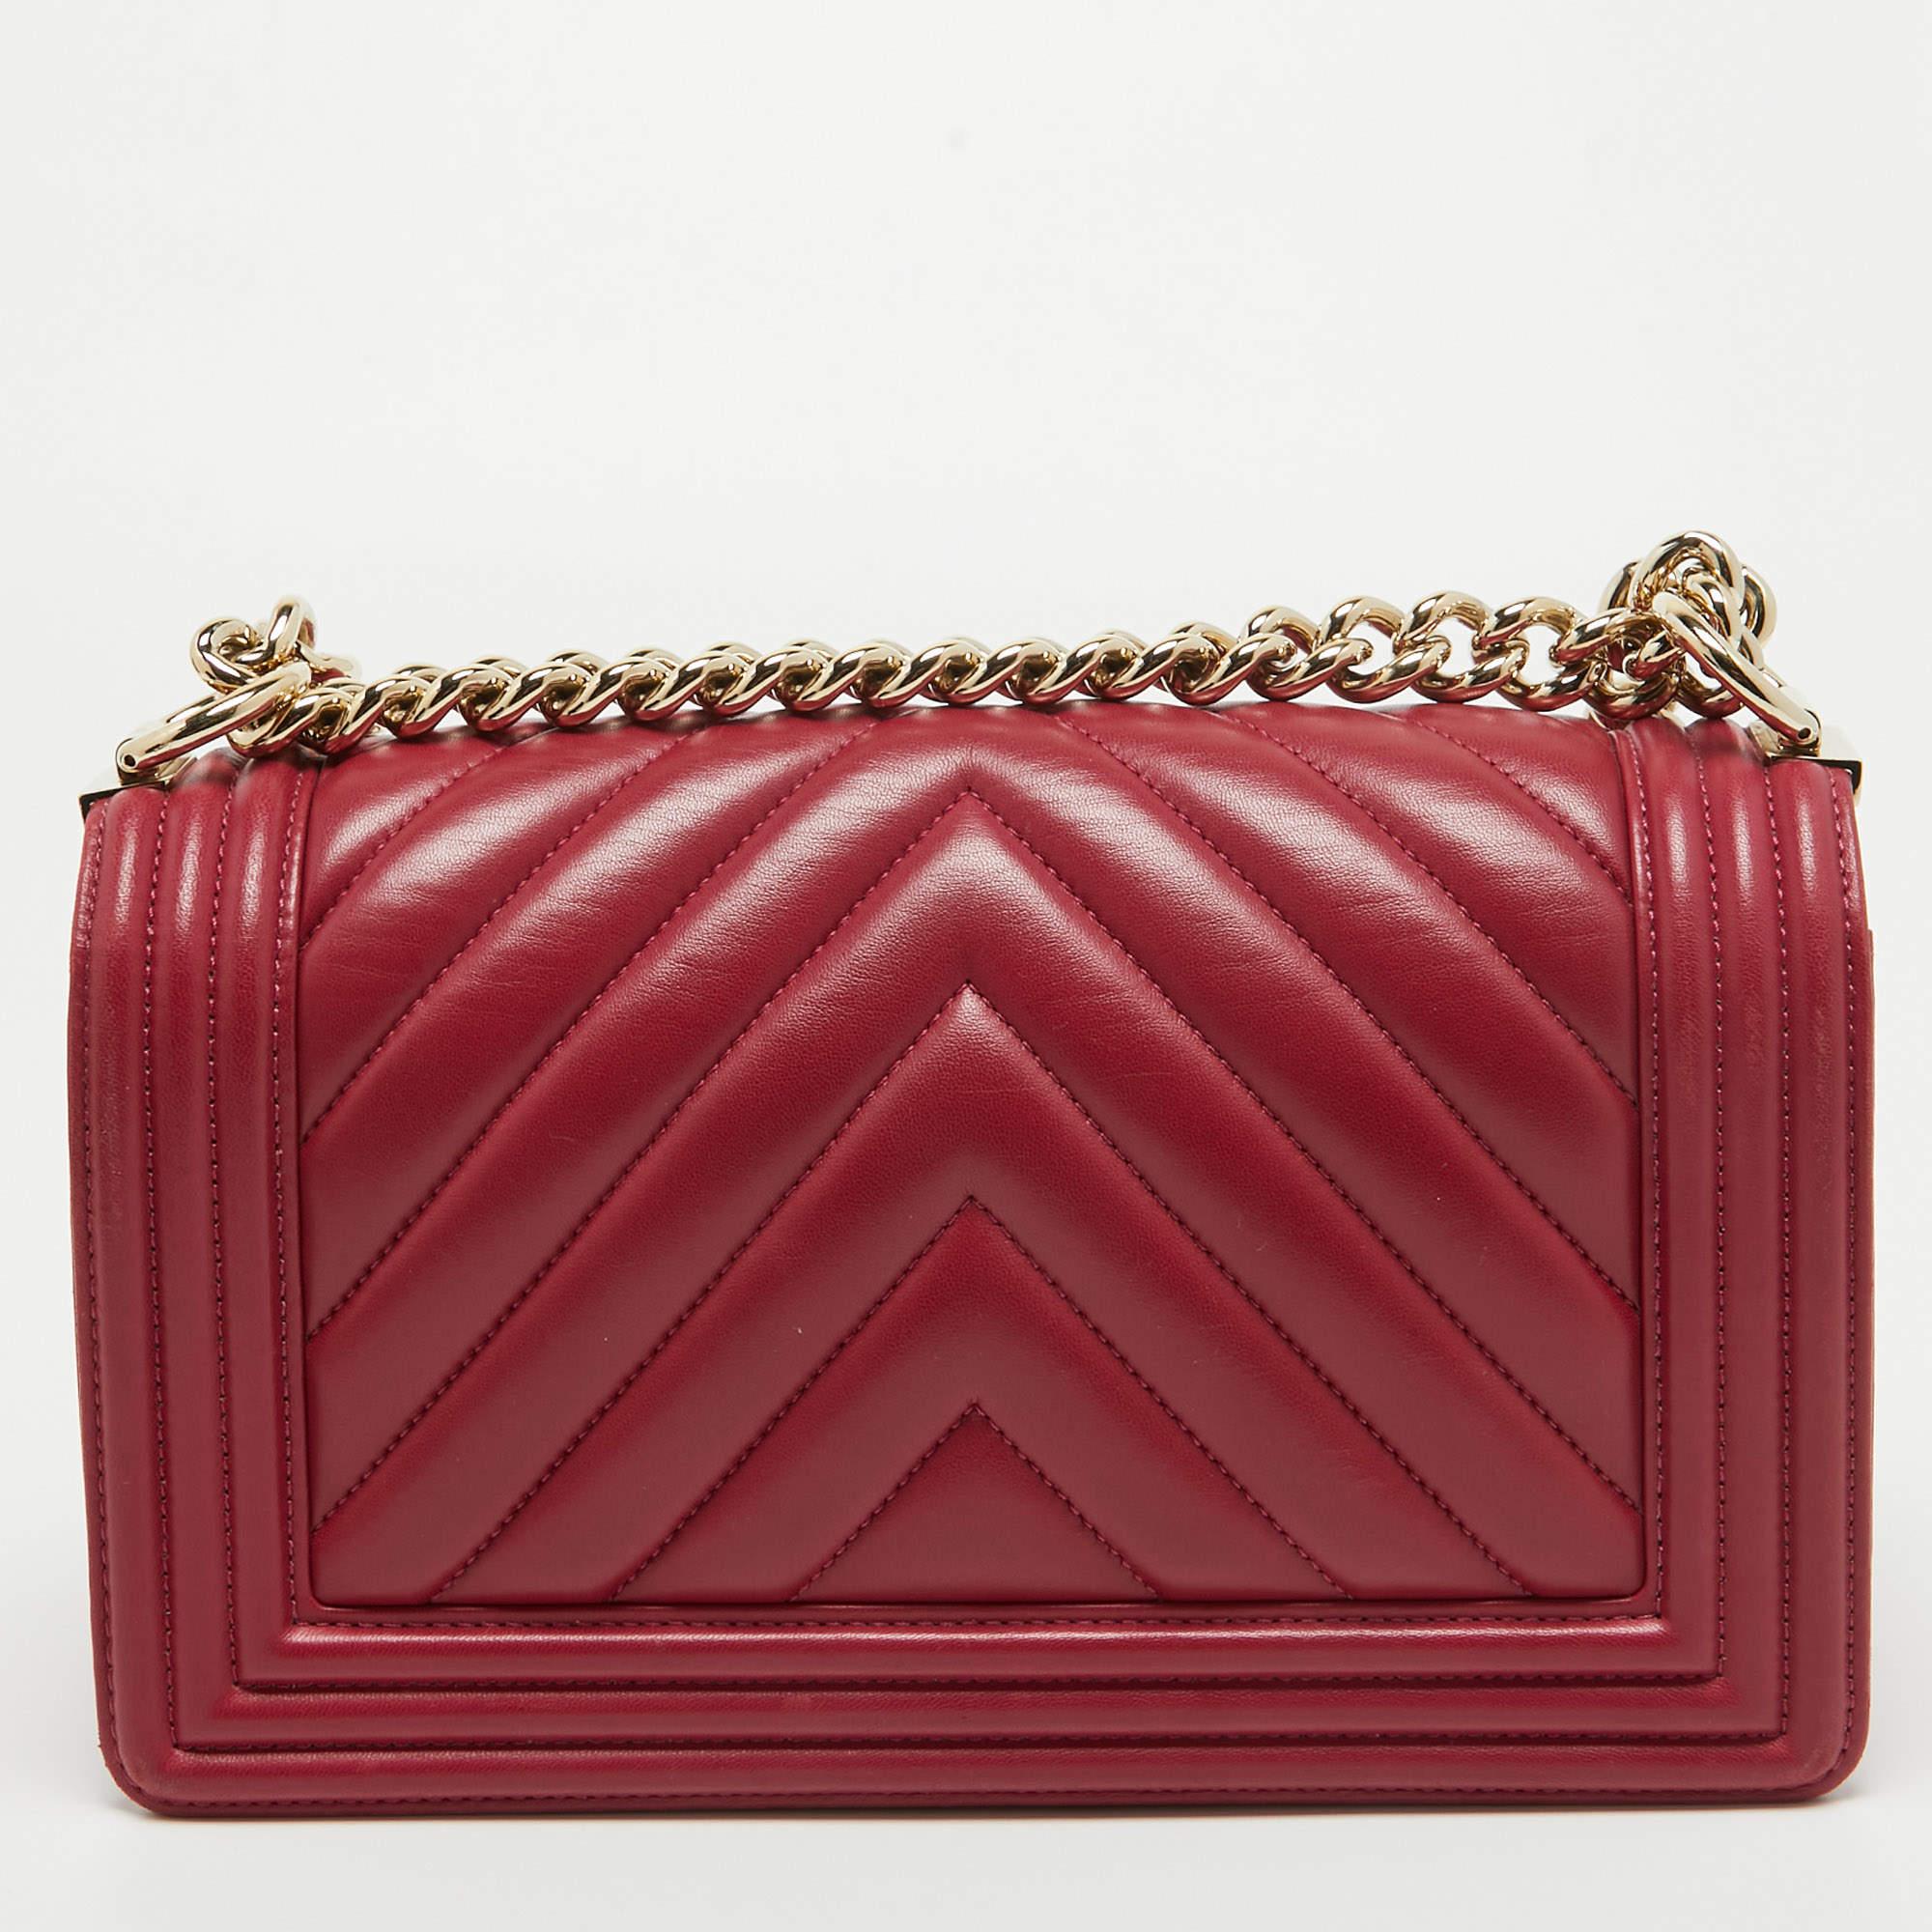 Introduced as a part of the Chanel Fall/Winter collection of 2011, the Boy flap bag is alluring and complemented with exquisite details. This fuchsia creation is meticulously crafted from Chevron leather and features side paneling, a chain-leather